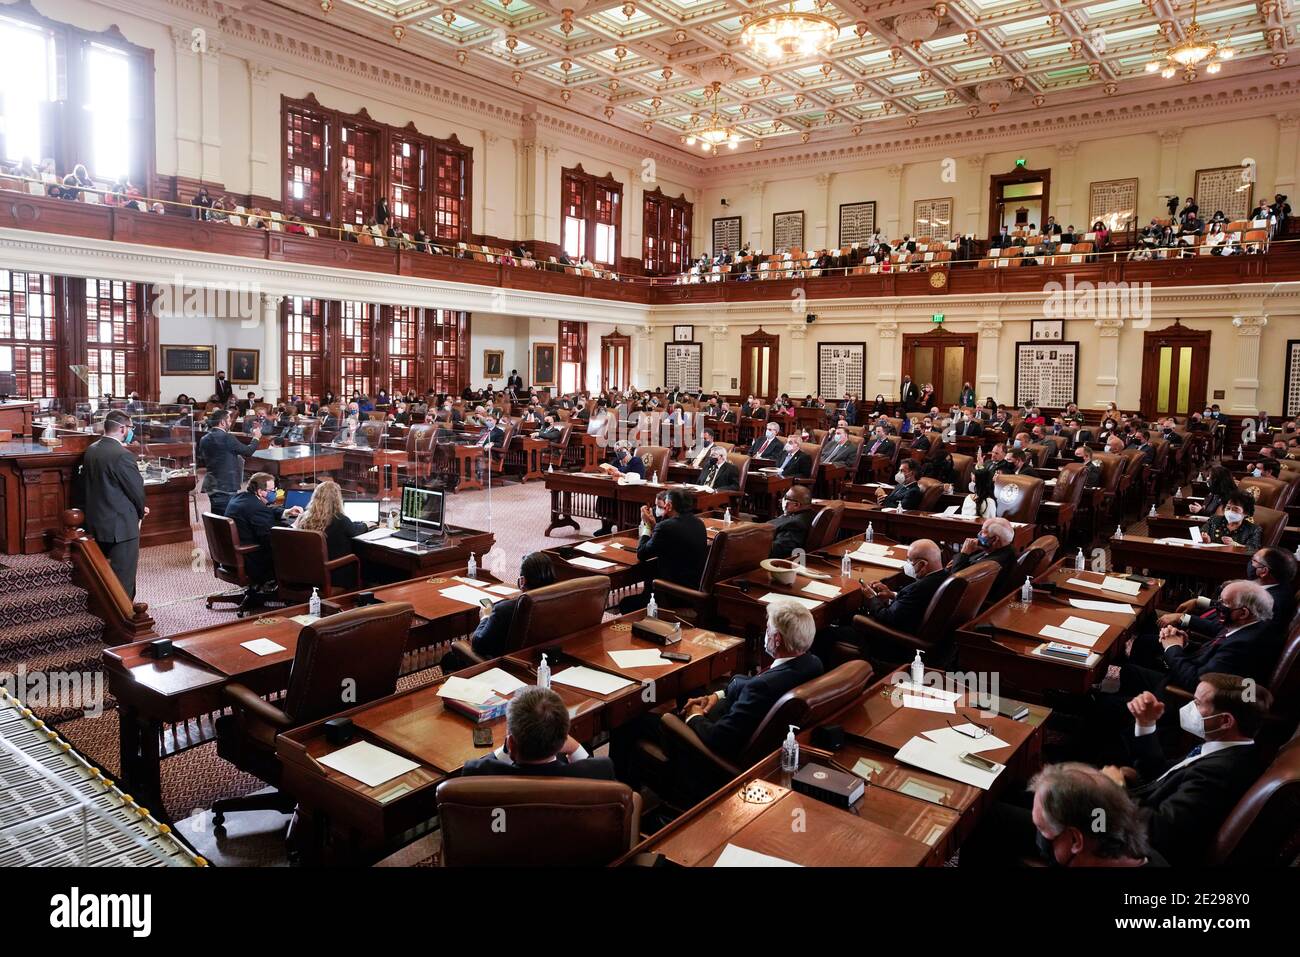 Austin, Texas January 12, 2021: Lawmakers gather in the Texas House chamber for the opening of the 87th session of the Texas Legislature. Lawmakers are facing a huge deficit due to the coronavirus pandemic. Credit: Bob Daemmrich/Alamy Live News Stock Photo